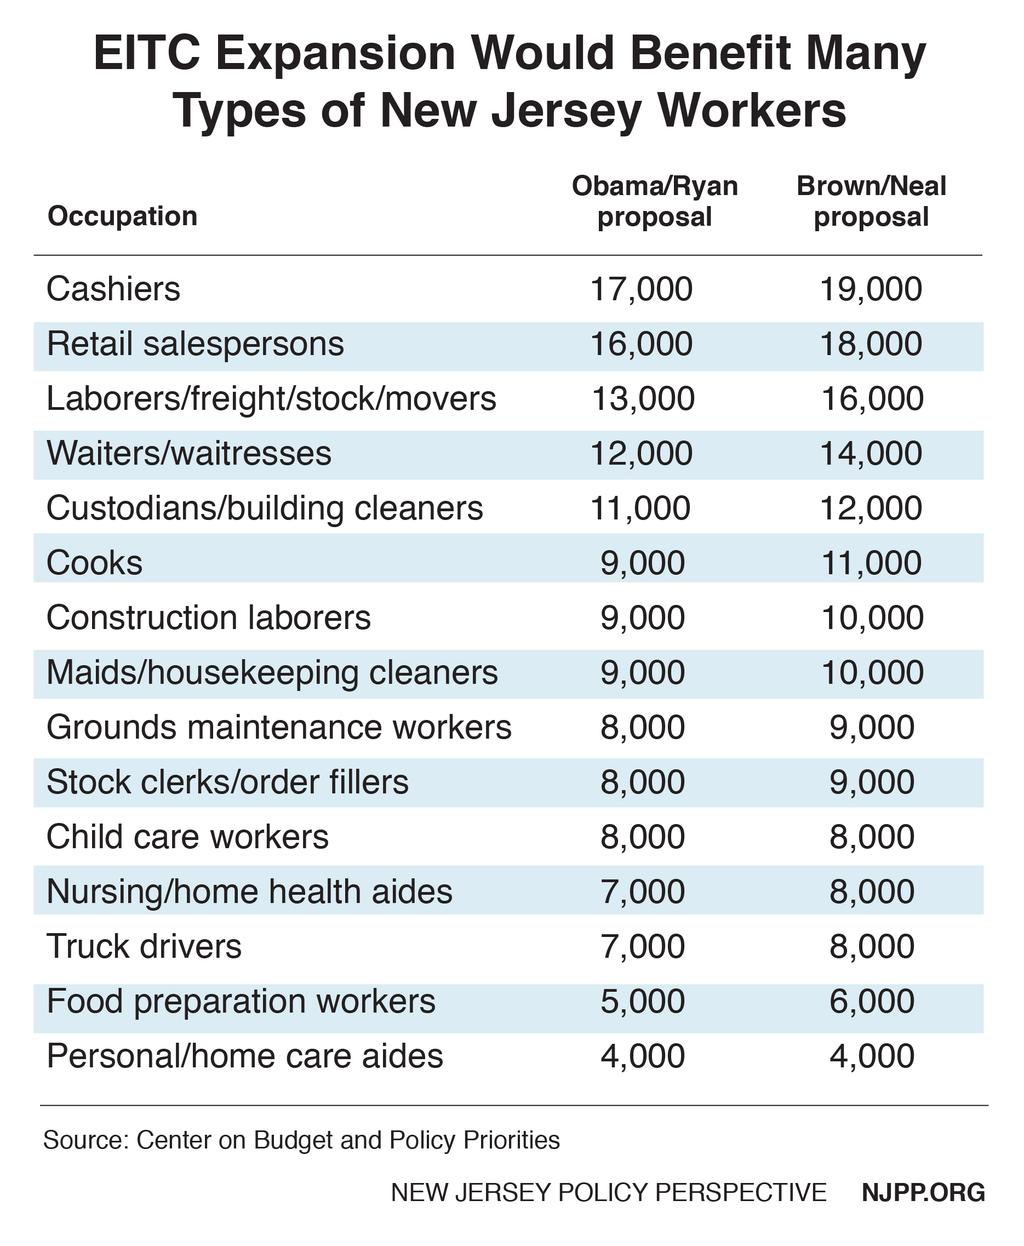 Appendix: Number of Workers